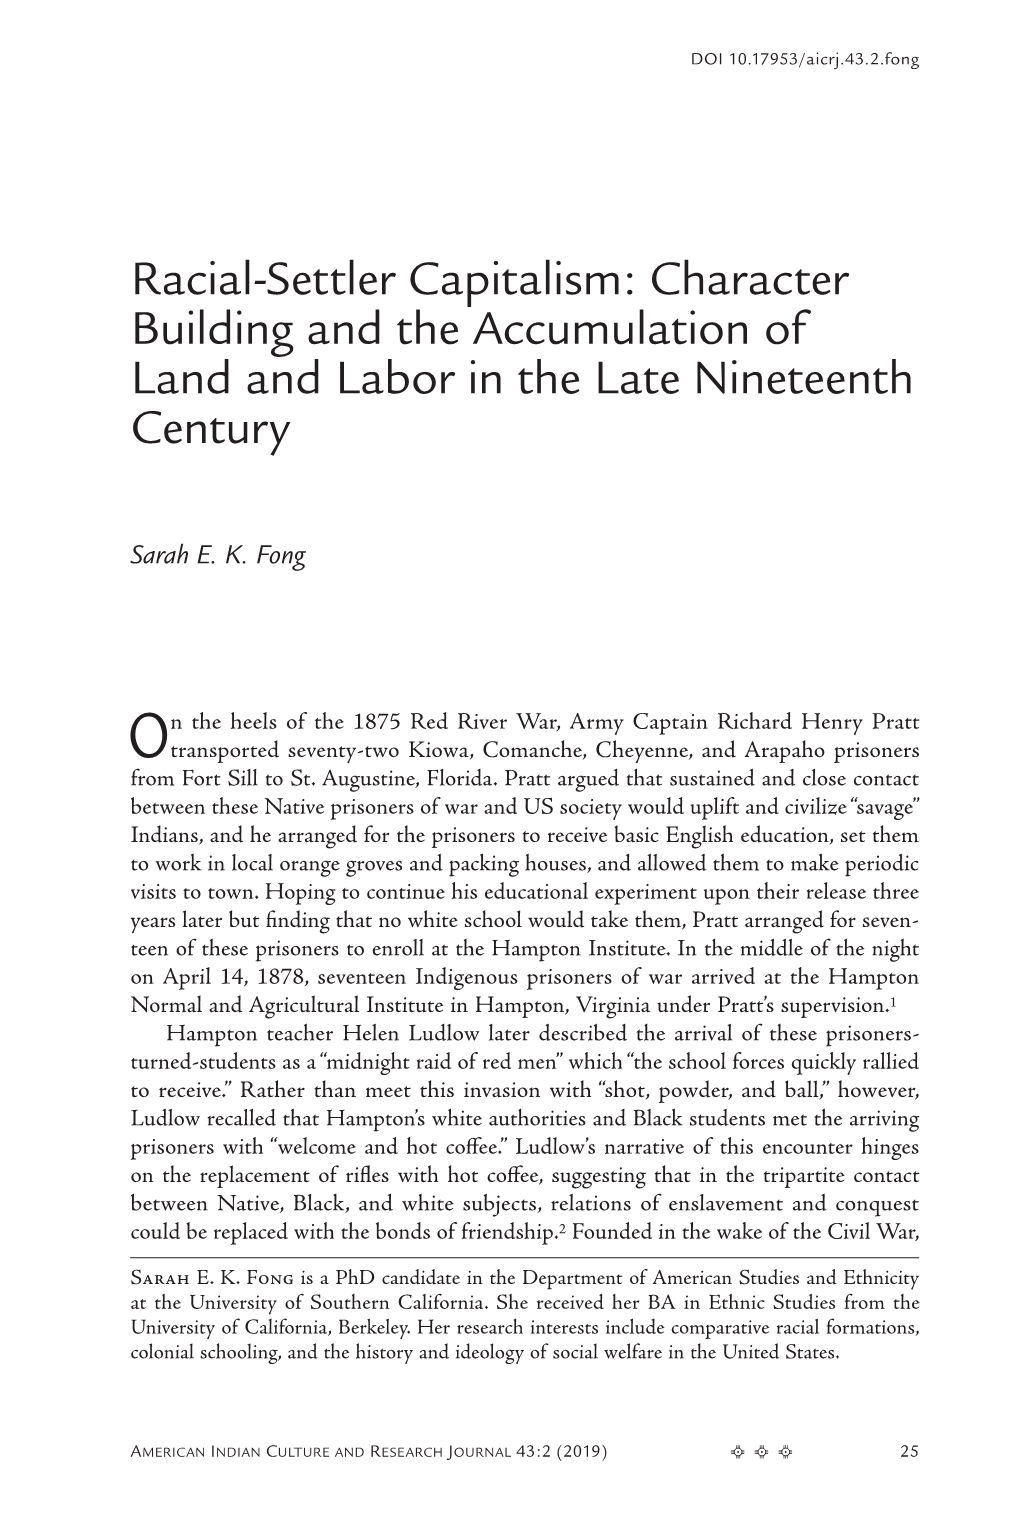 Racial-Settler Capitalism: Character Building and the Accumulation of Land and Labor in the Late Nineteenth Century